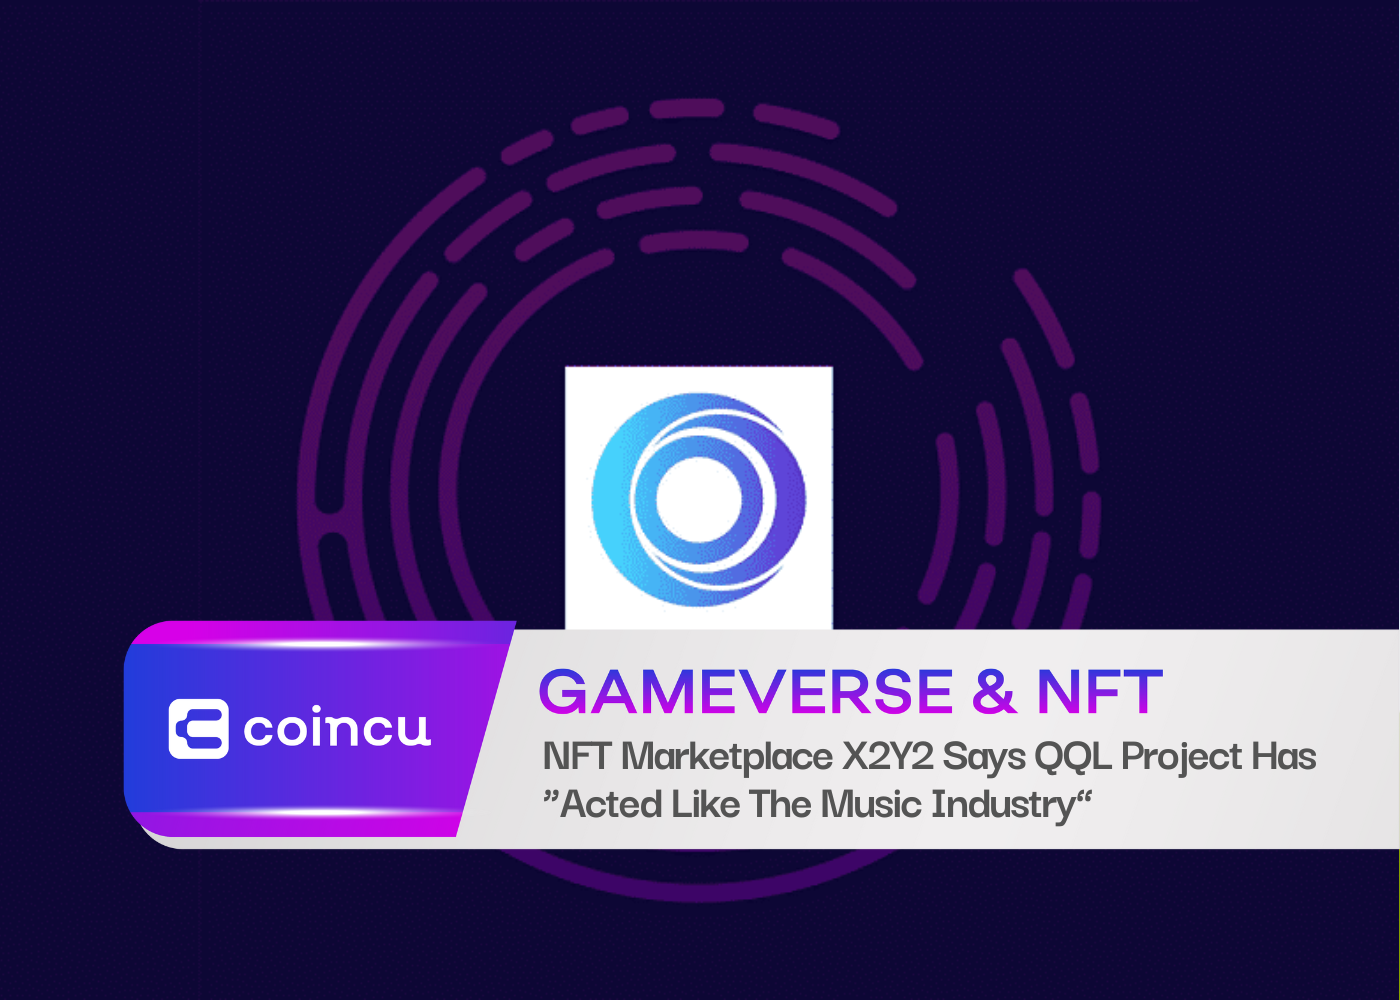 NFT Marketplace X2Y2 Says QQL Project Has “Acted Like The Music Industry”